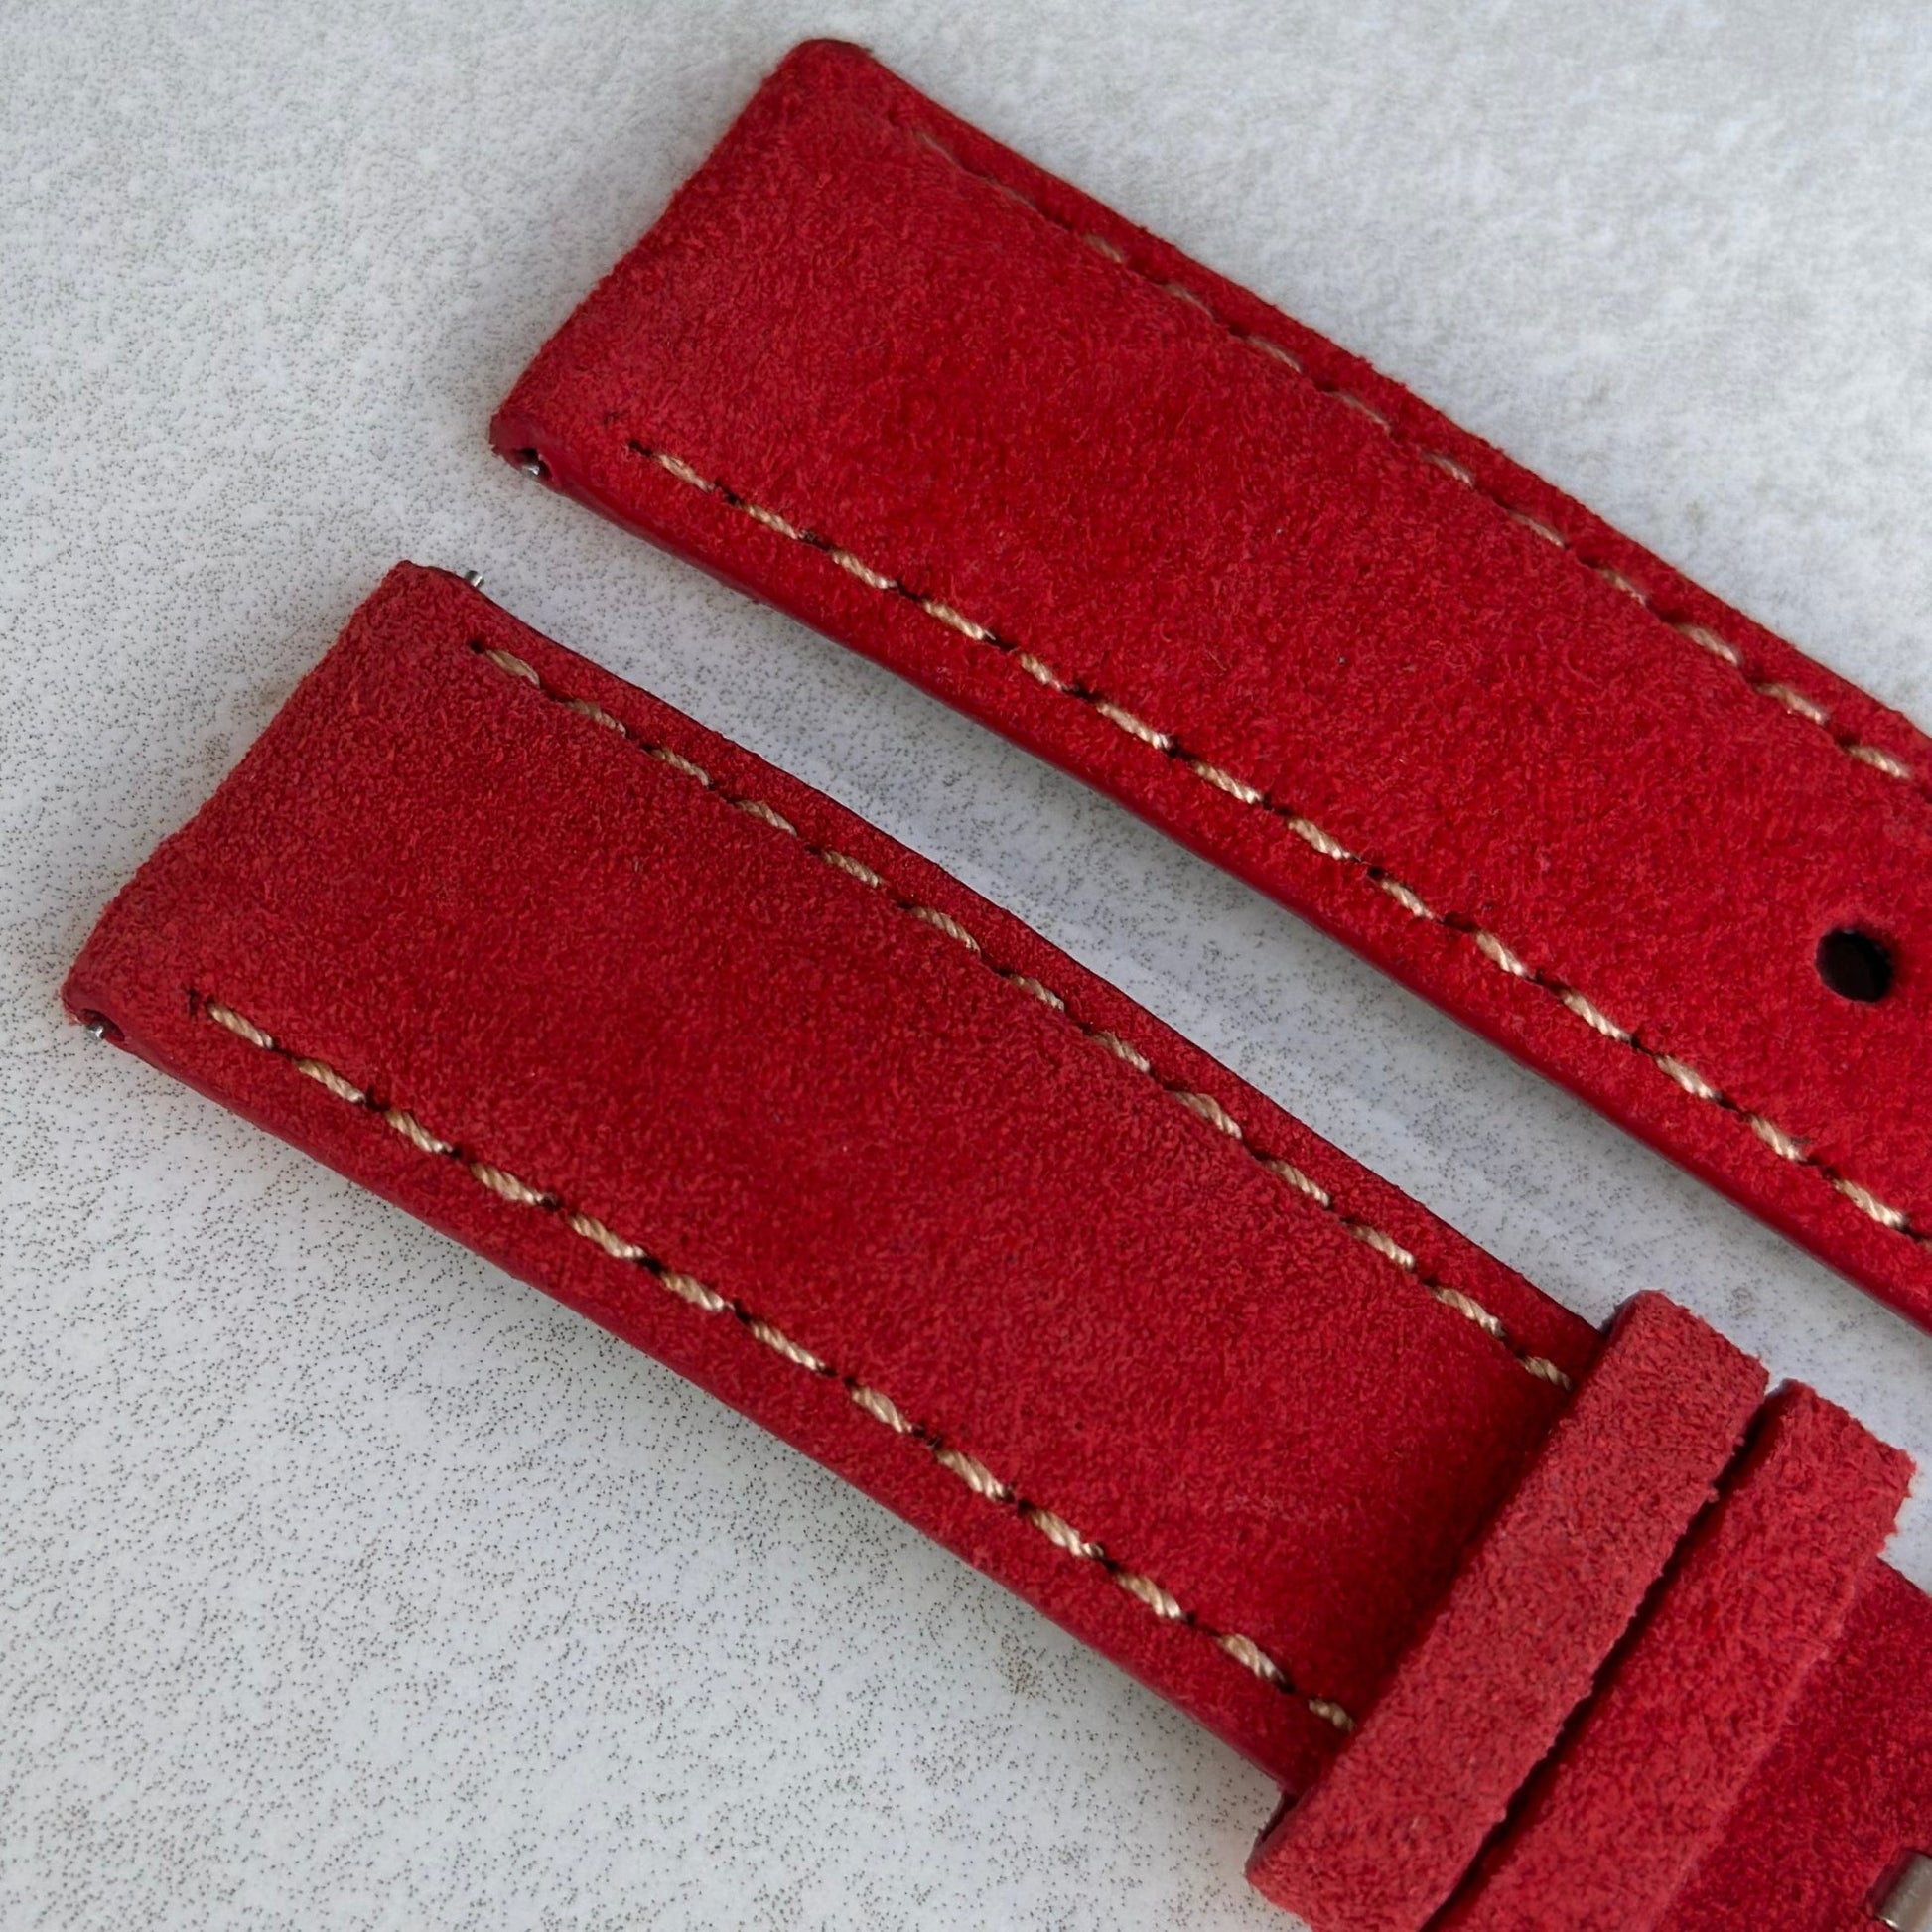 Top of the ruby red suede watch strap. Ivory stitching. Padded suede watch strap. Watch And Strap.